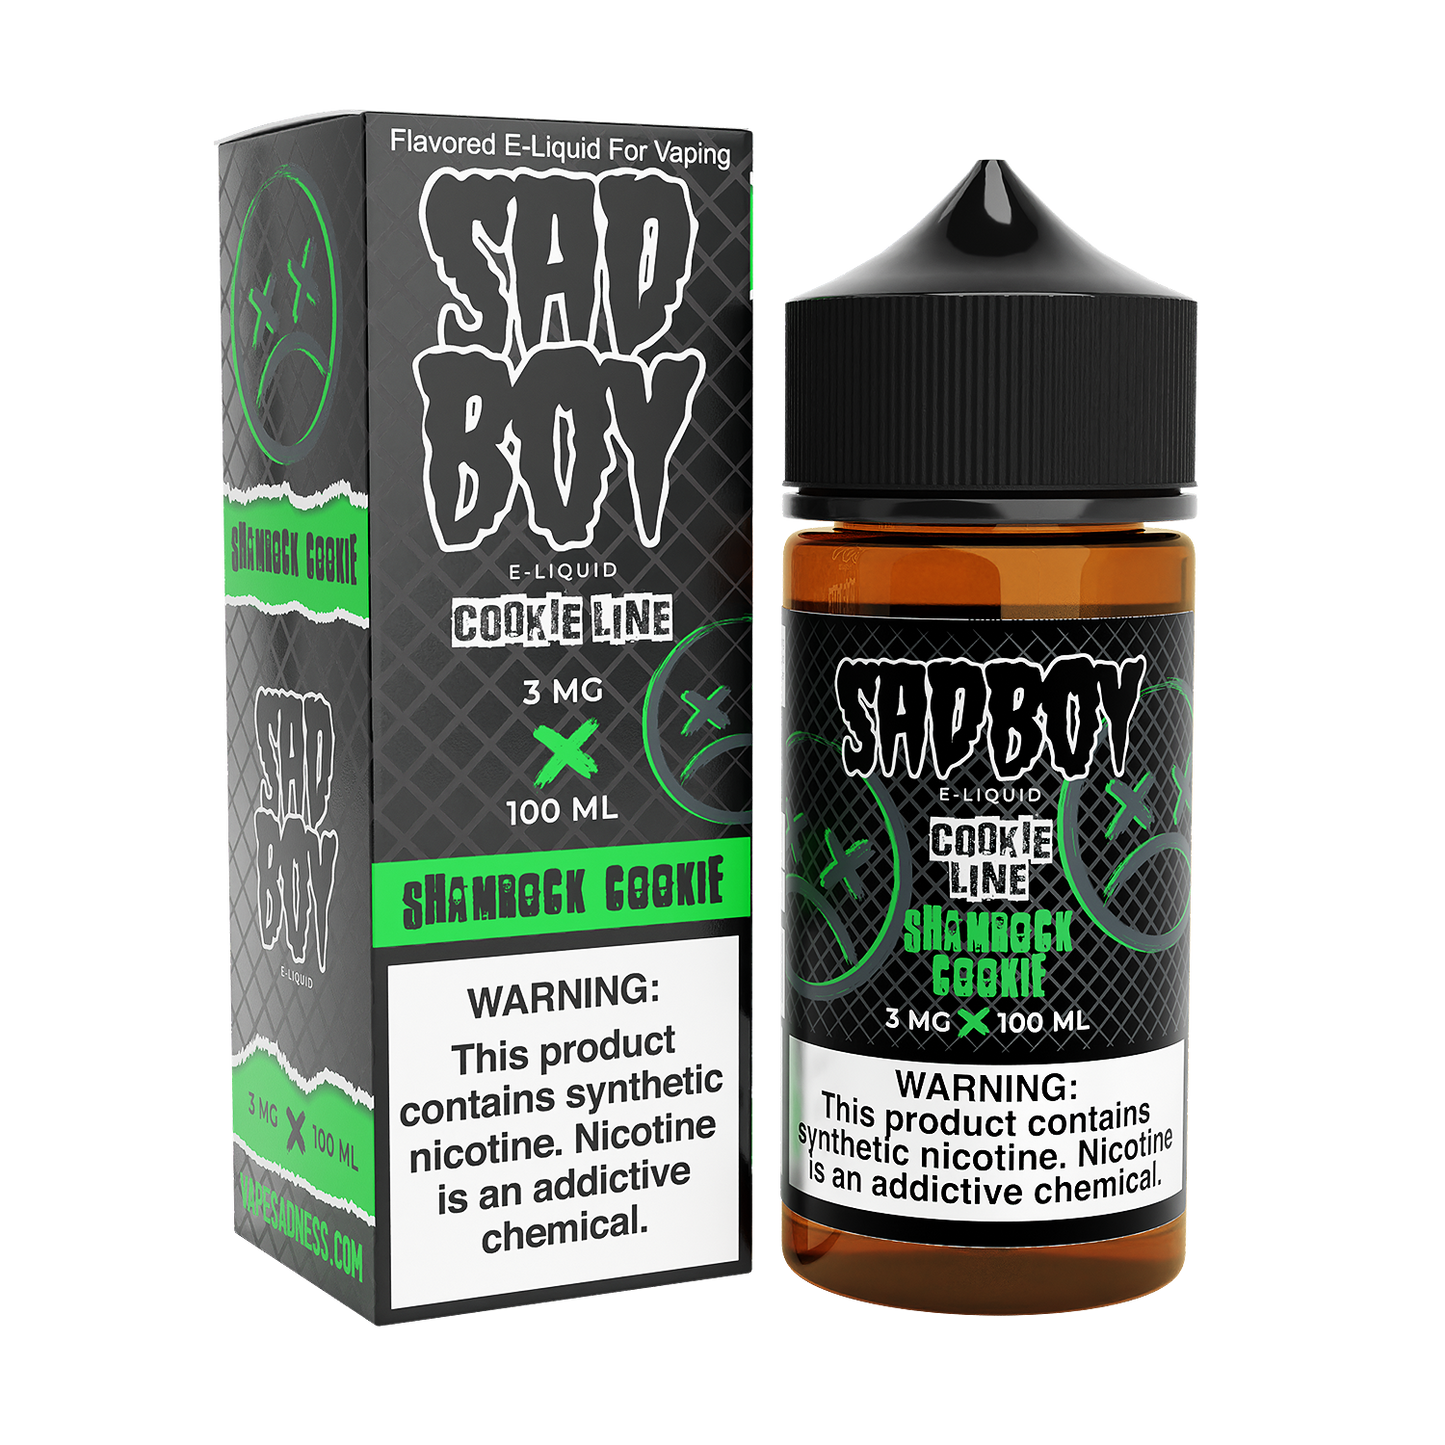 Shamrock Cookie by Sadboy 100ml with packaging